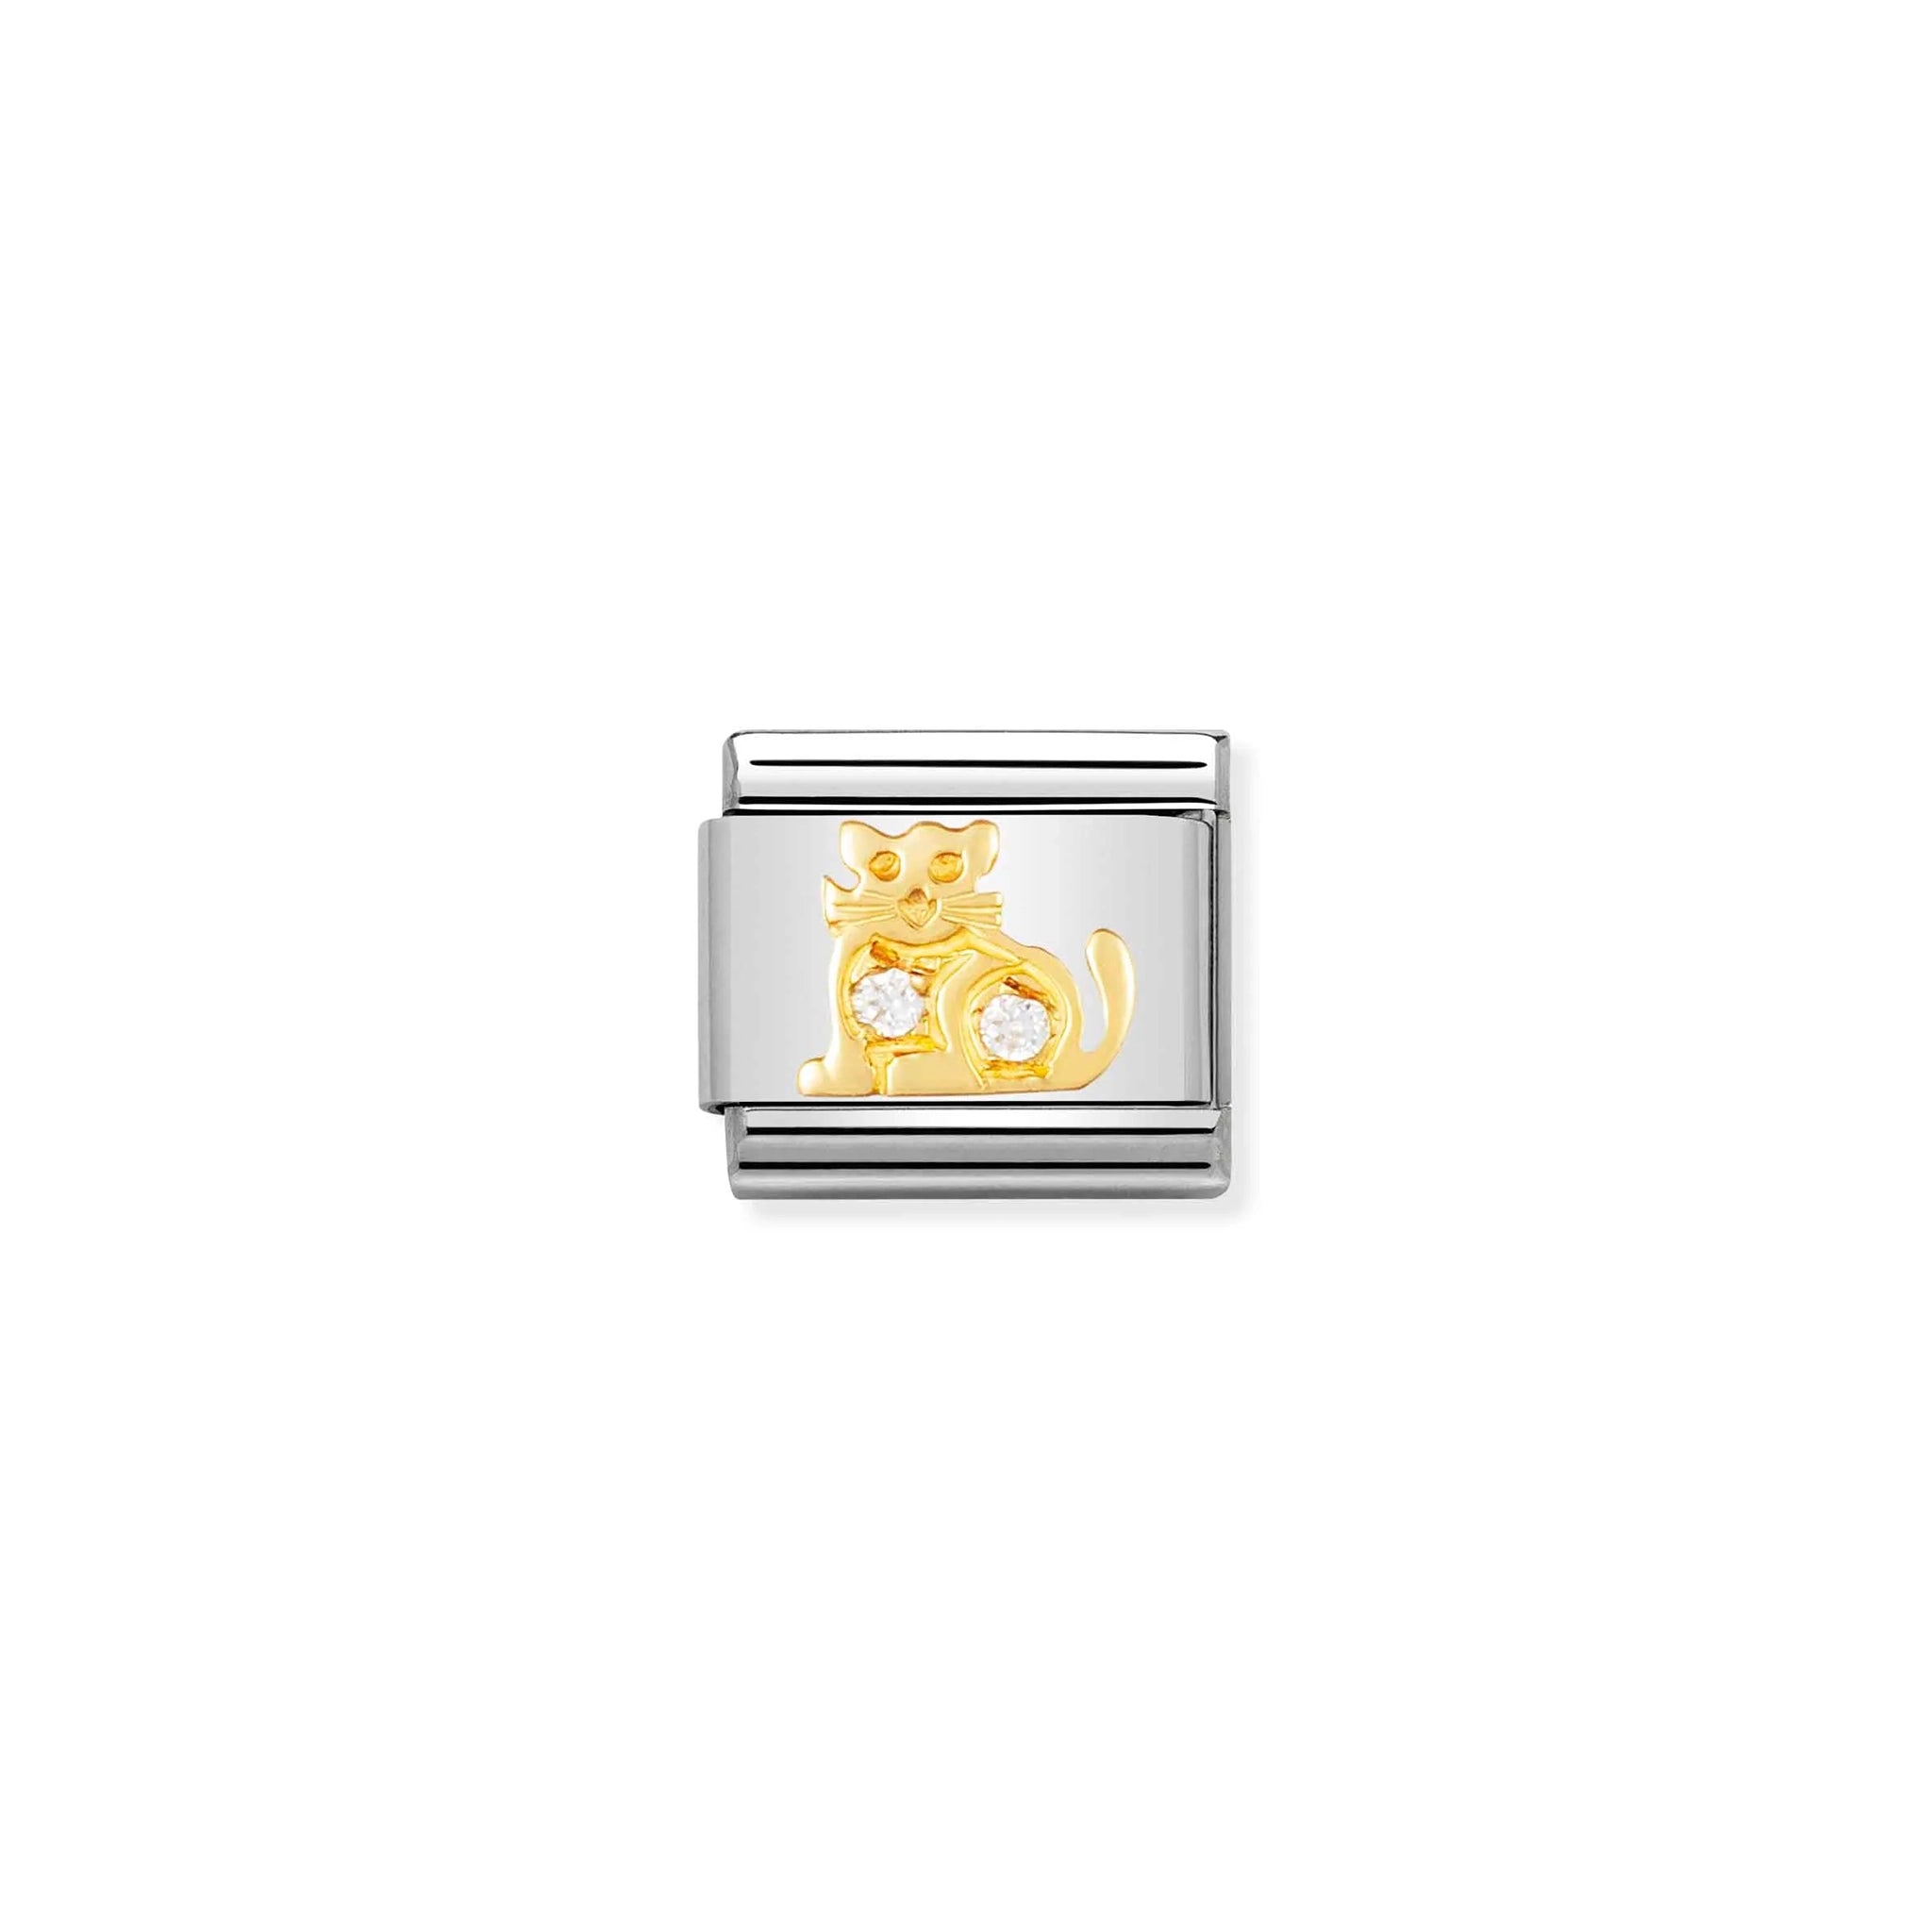 A Nomination charm link featuring a gold sitting cat set with two white cubic zirconia stones